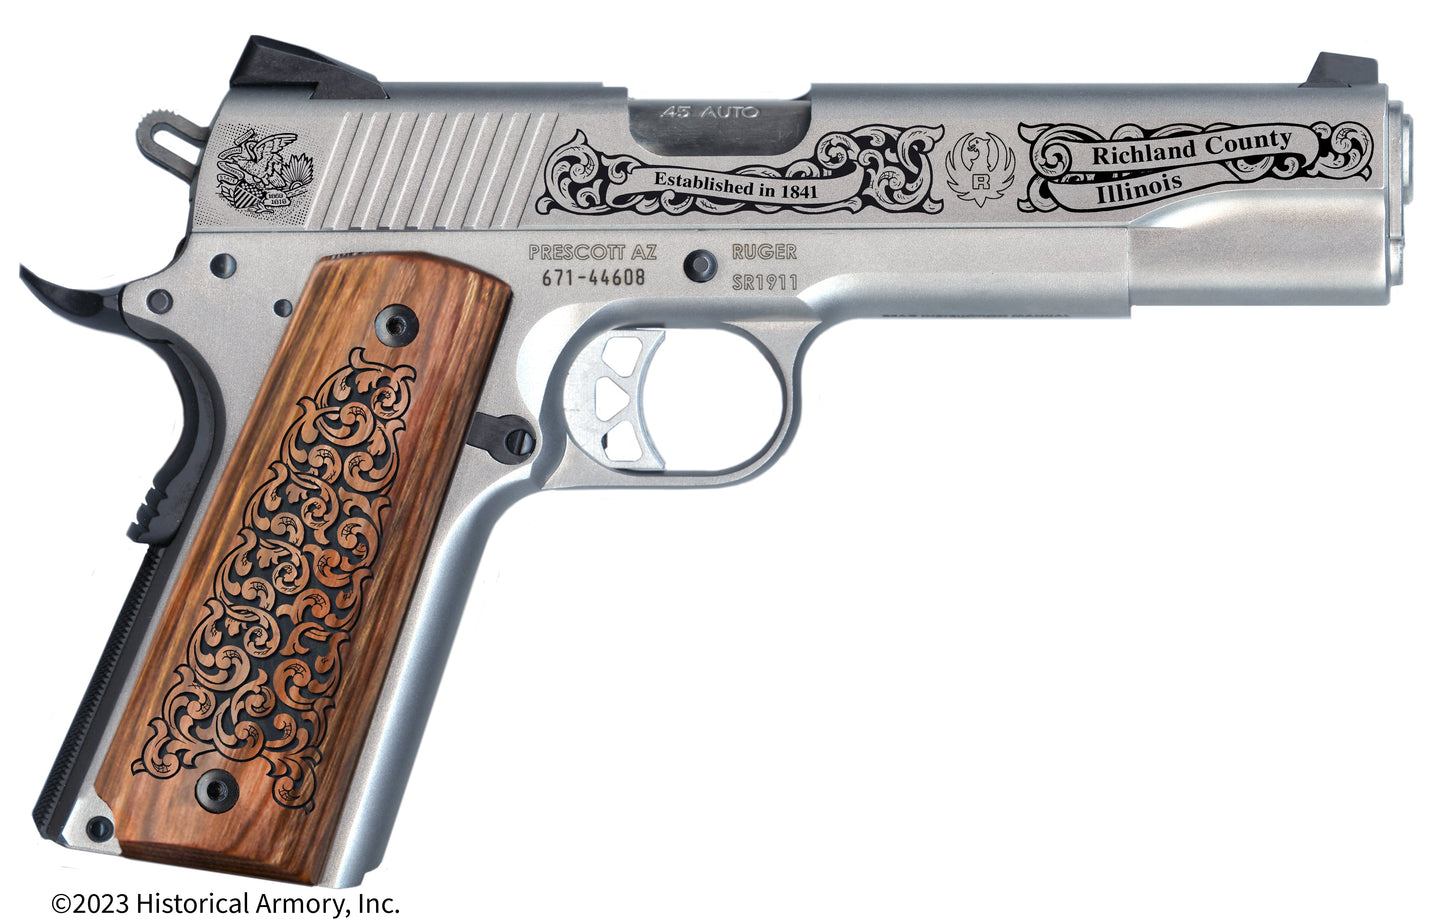 Richland County Illinois Engraved .45 Auto Ruger 1911